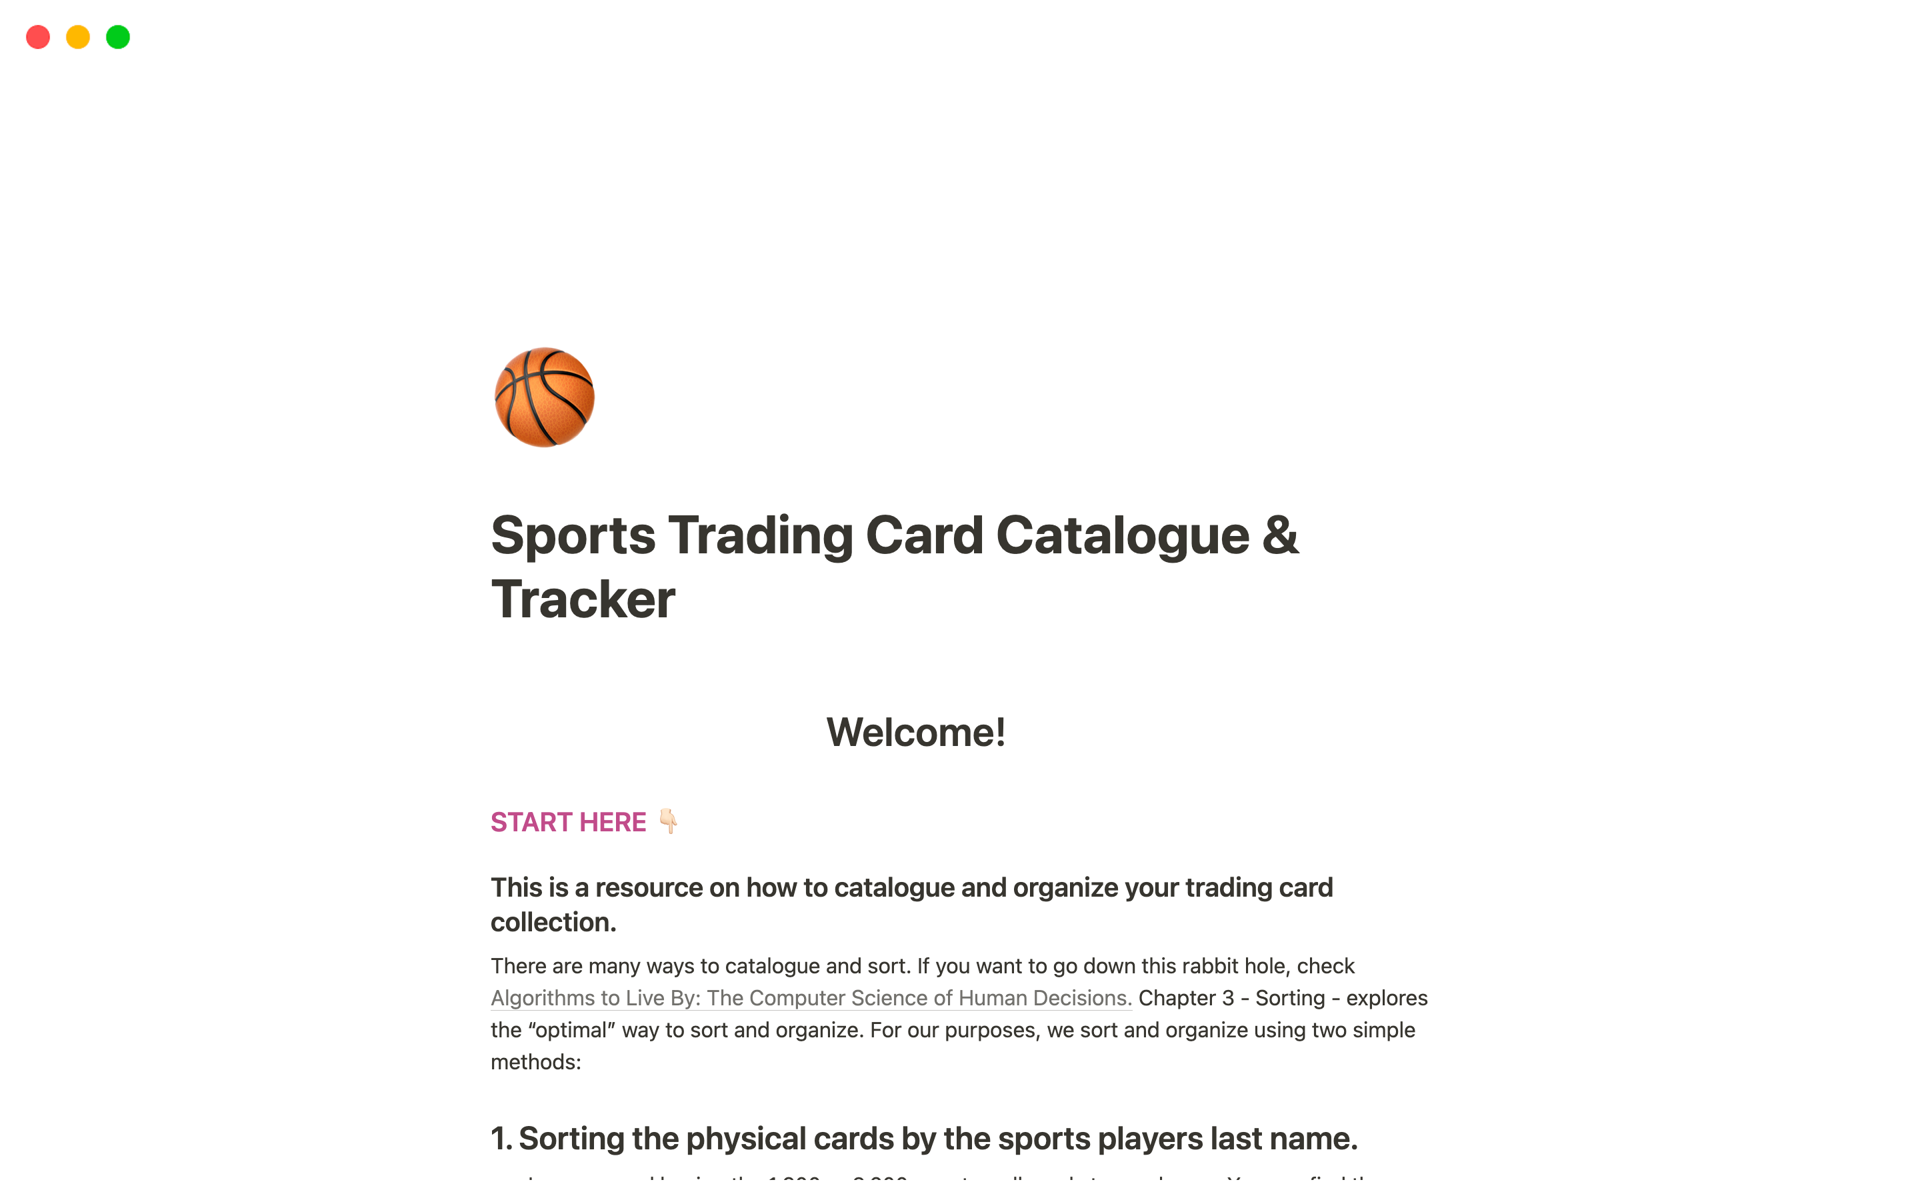 Catalogue, organize, track gains(losses), and showcase your sports trading card collection